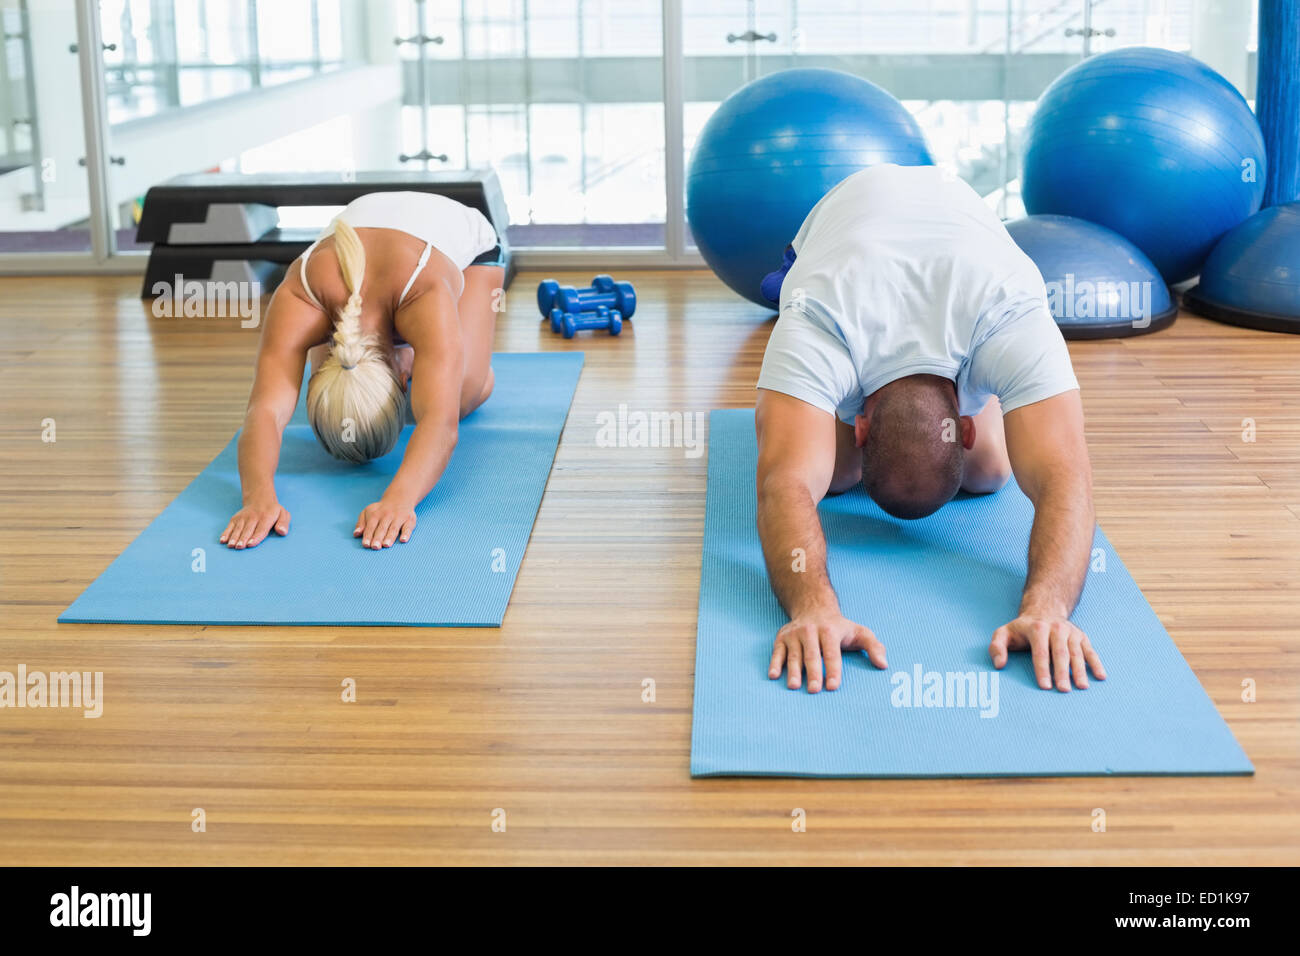 Couple in bending posture at fitness studio Stock Photo